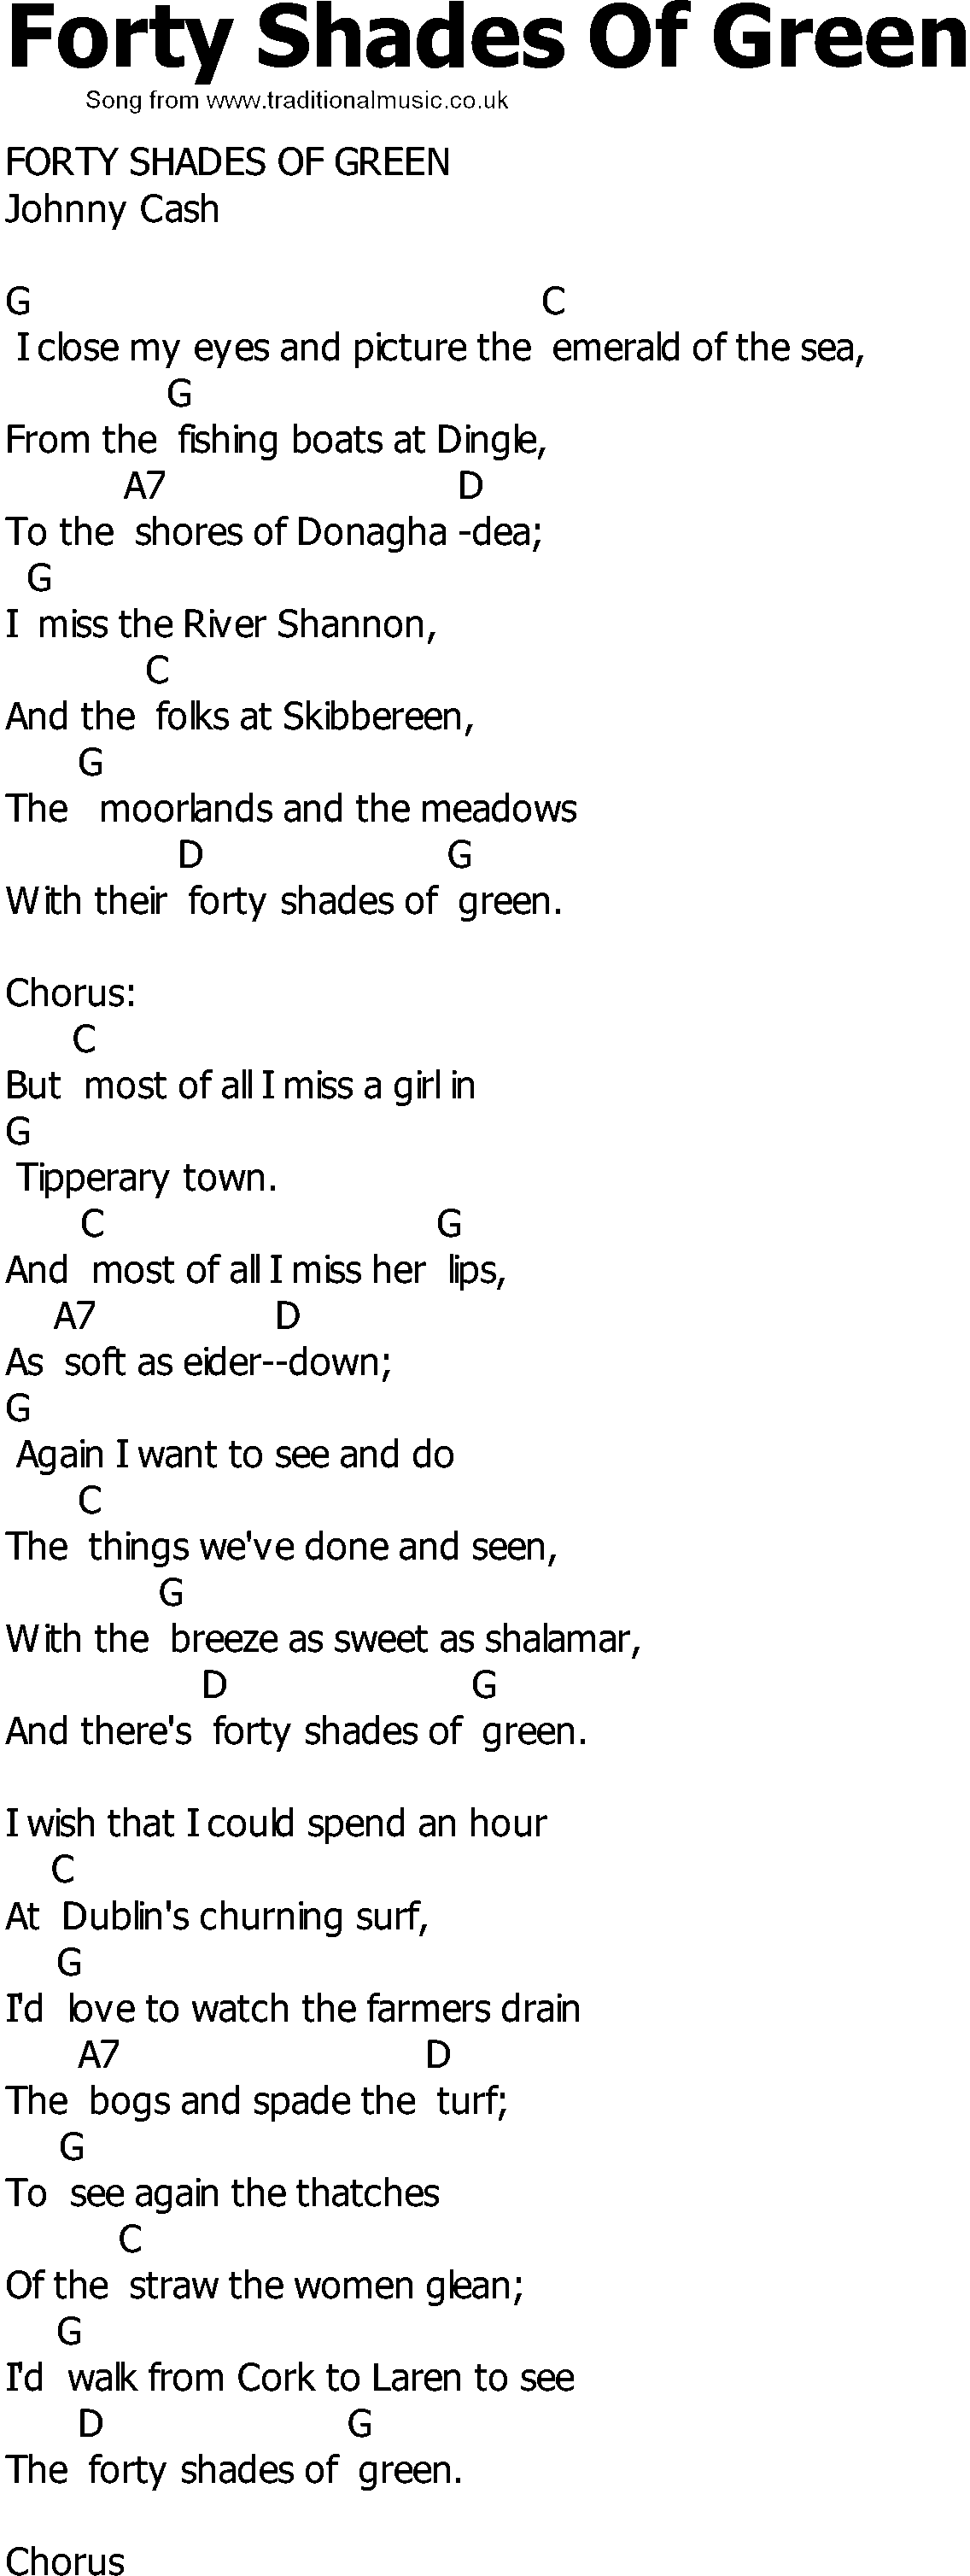 Old Country song lyrics with chords - Forty Shades Of Green